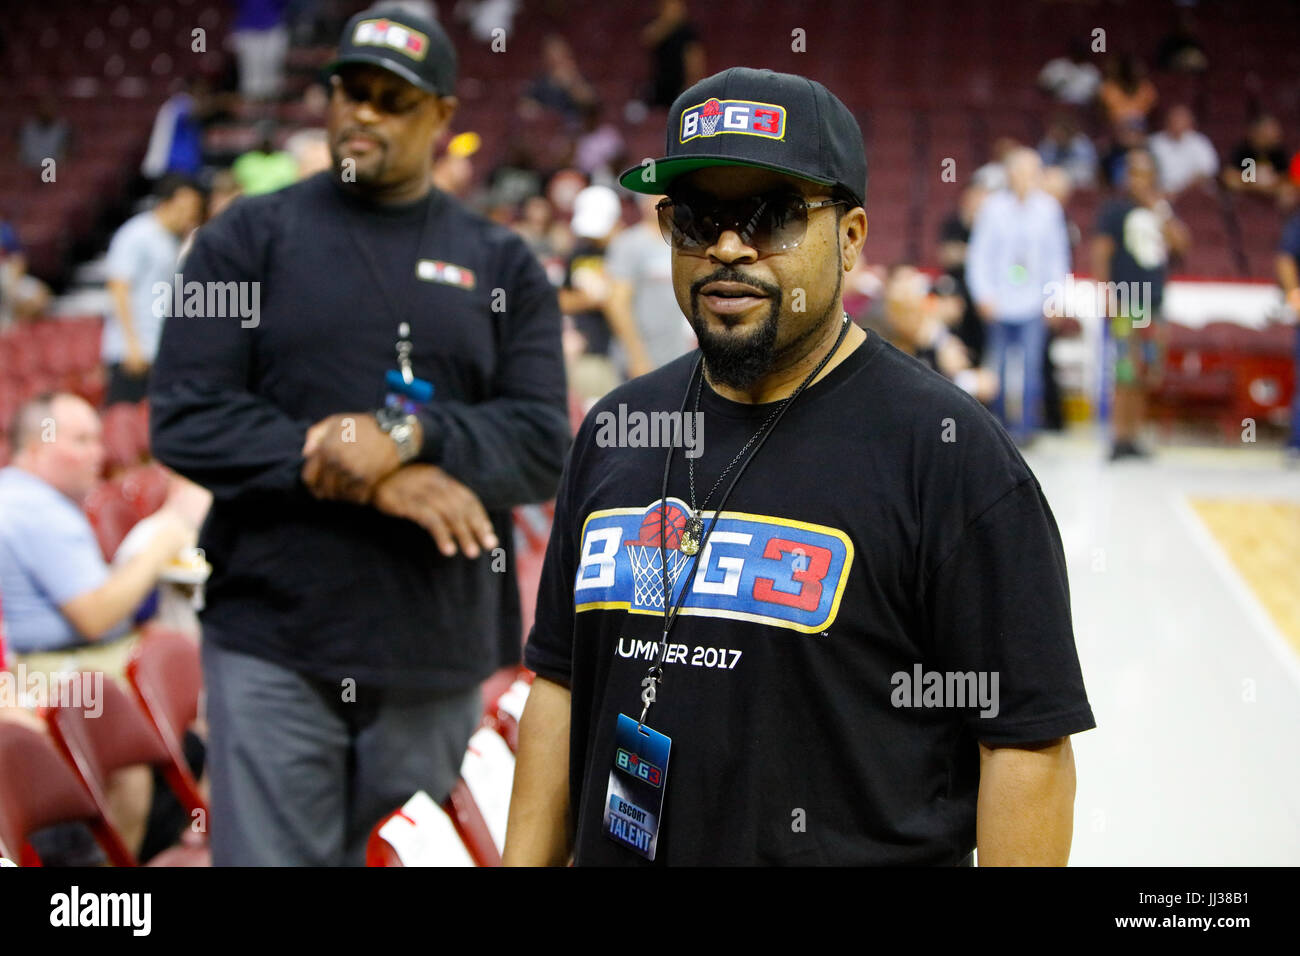 Ice Cube attends Big 3 league Phiily,PA 7/16/17 Stock Photo